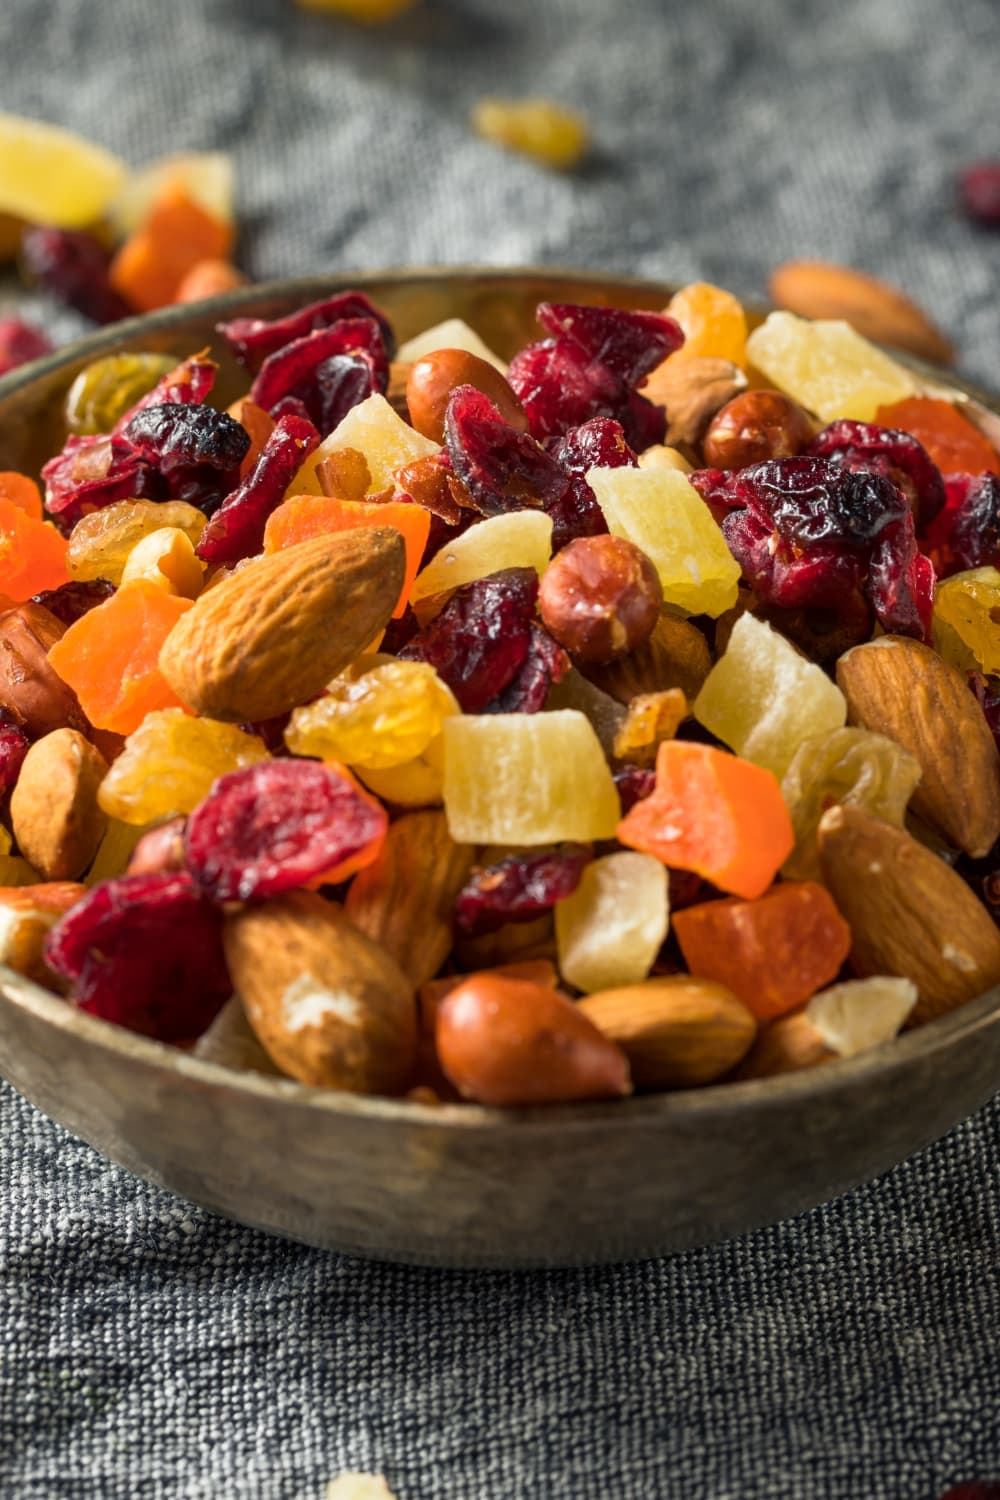 Dried Fruits and Nut Mix with Almonds, Cranberries and Raisins on a Wooden Bowl